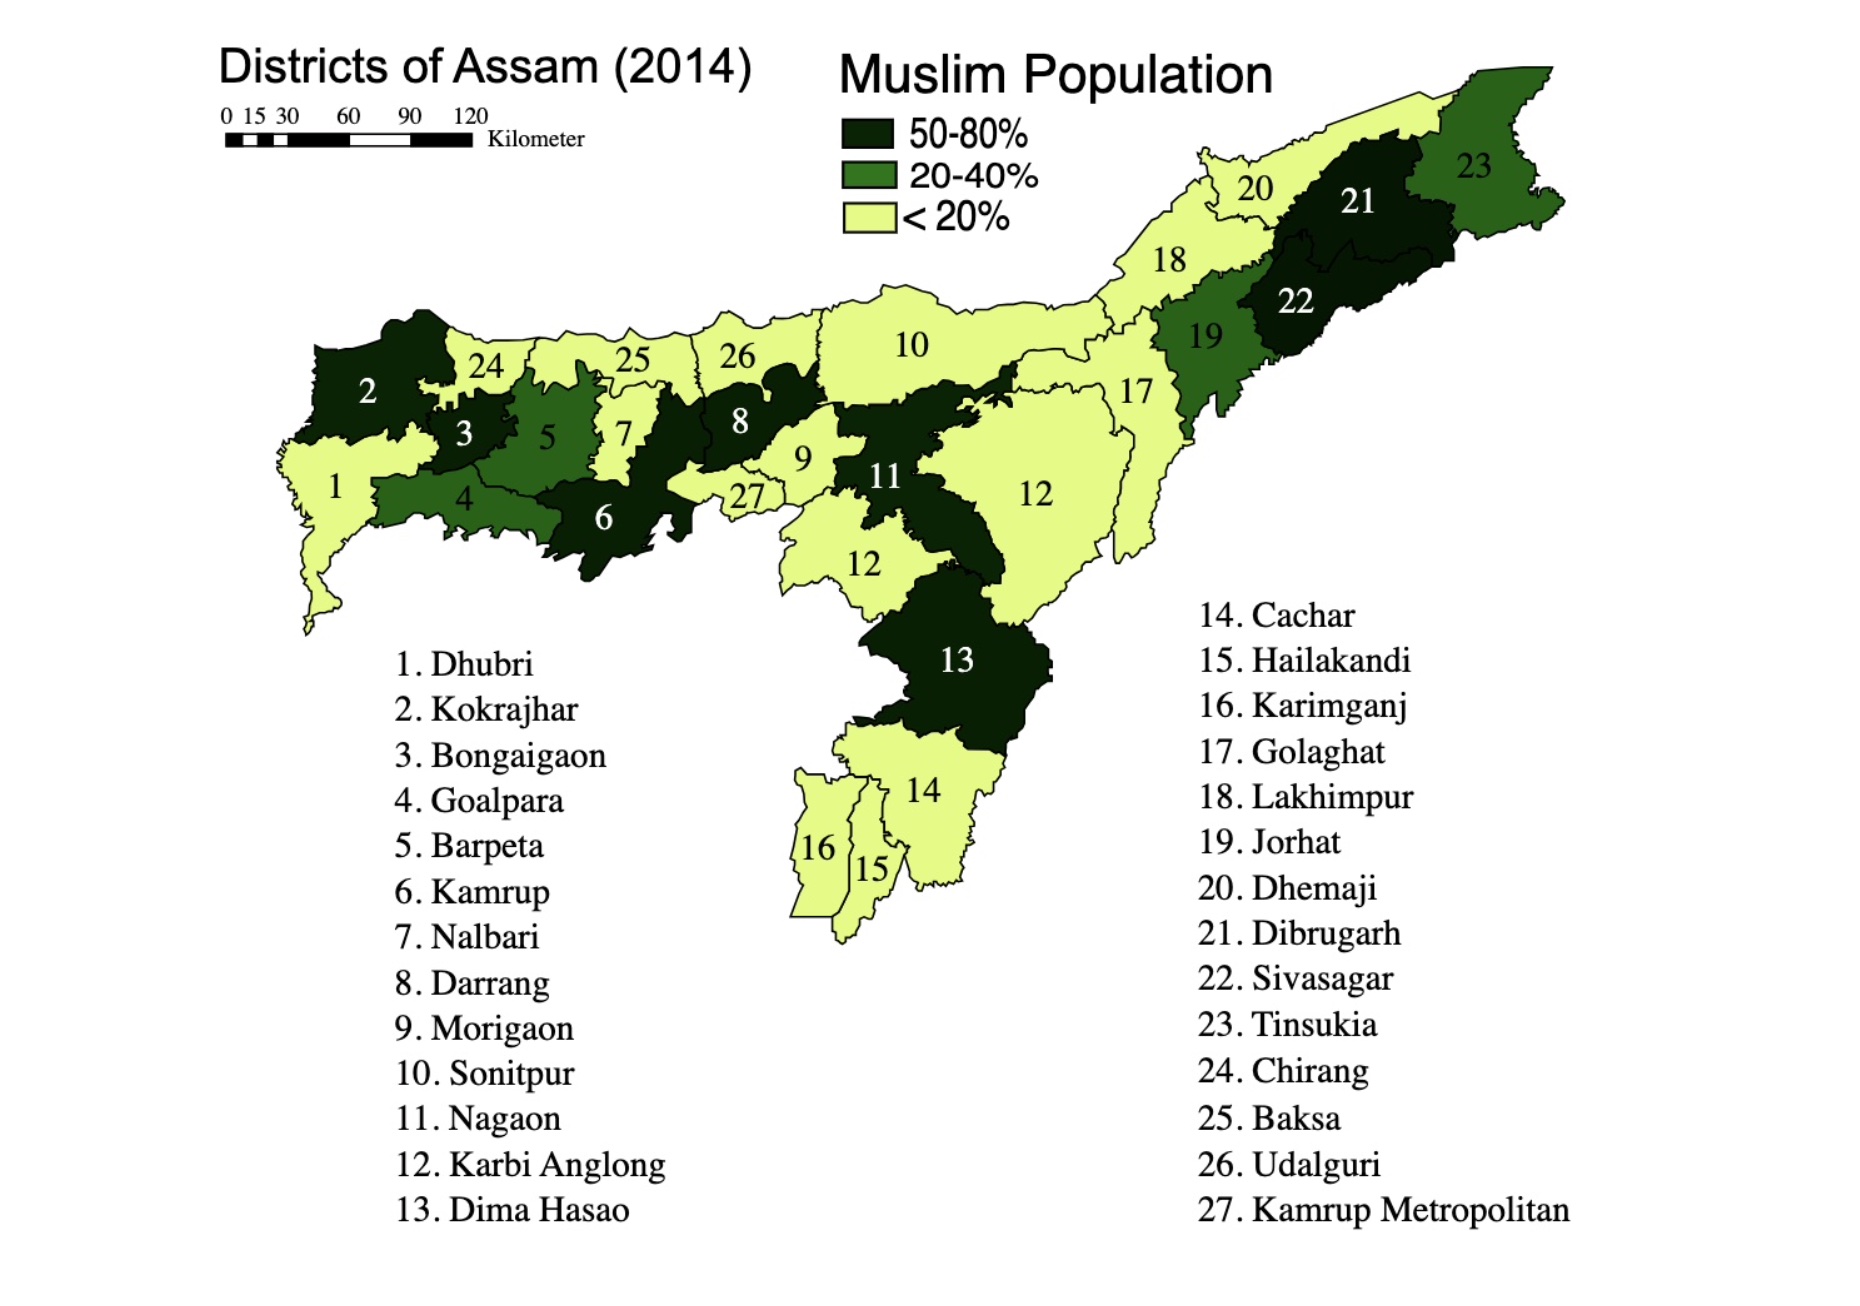 Muslim Population in Assam based on district maps and census of India 2011. Image via Wikipedia by SPQR10. CC BY-SA 4.0.